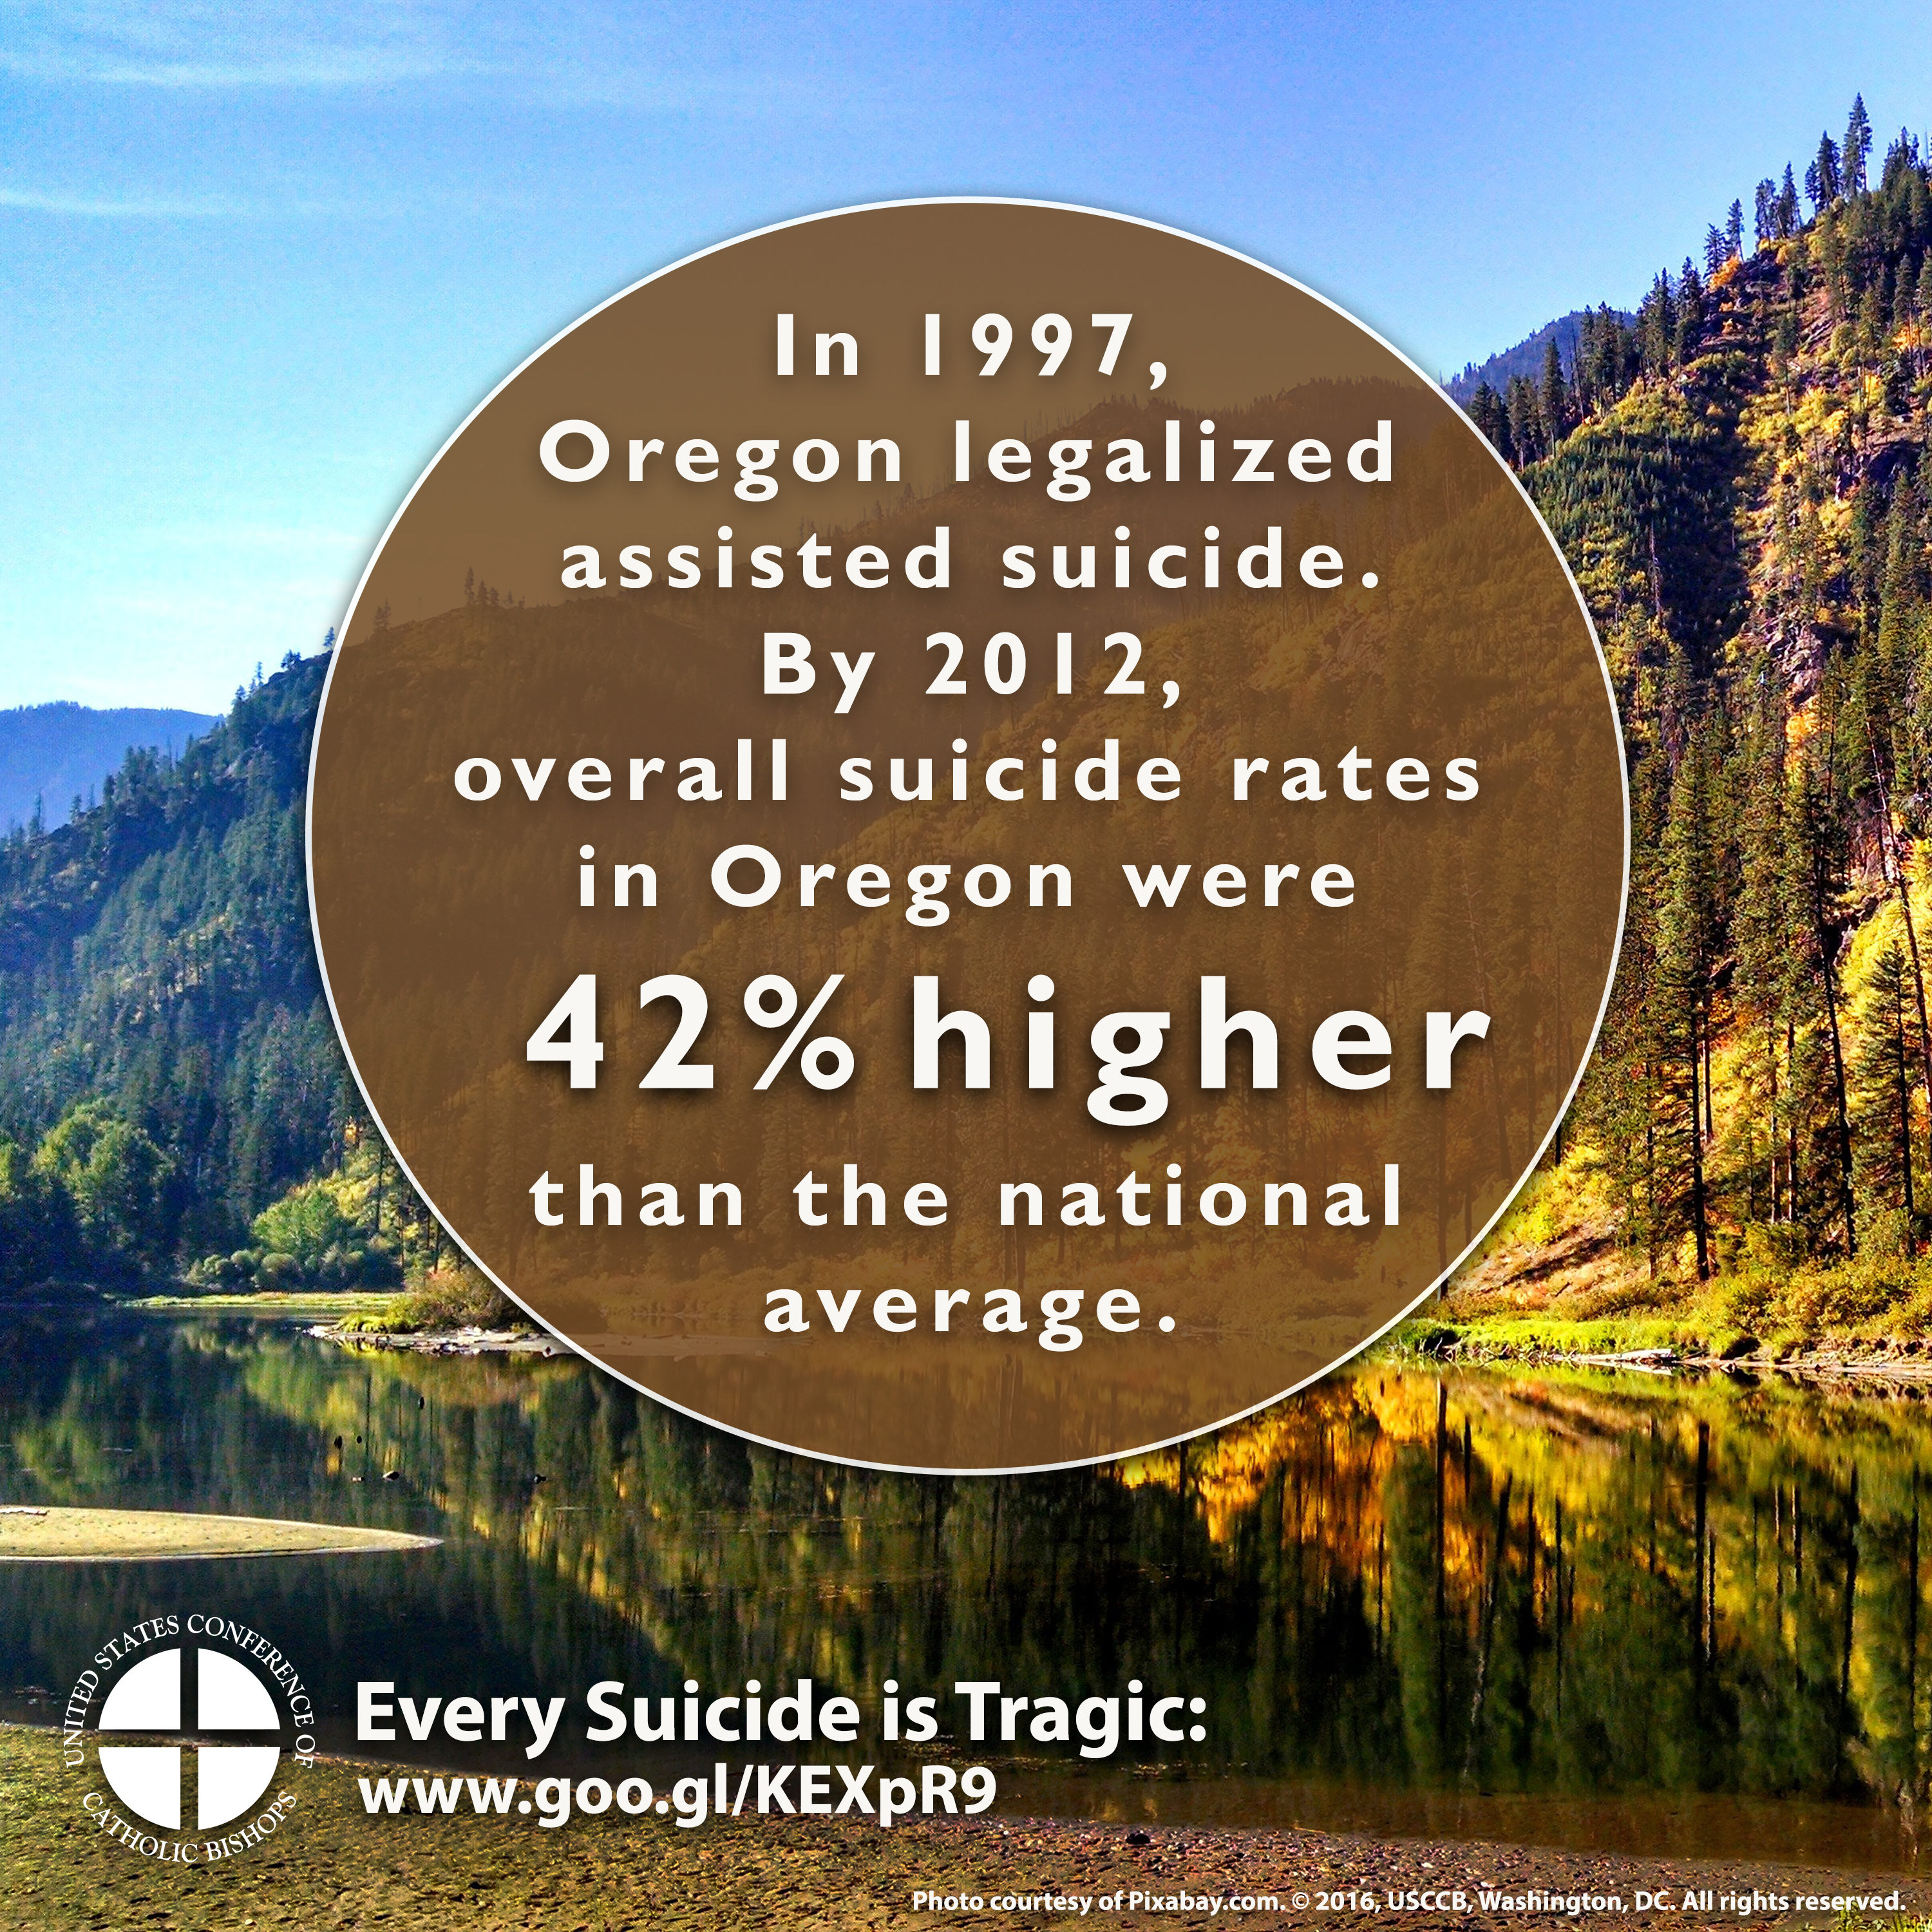 Sample meme: Every Suicide is Tragic - www.usccb.org/respectlife